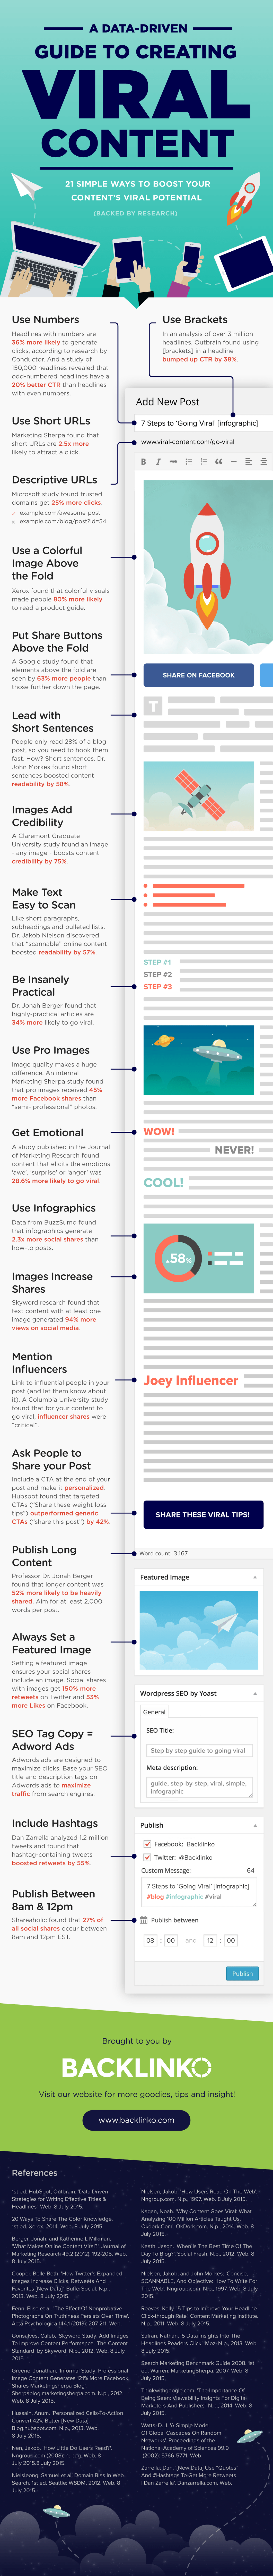 Dreaming of viral content? Stuff that takes off and is seen by millions? Increase your chances of going viral with the 21 tips on this infographic!